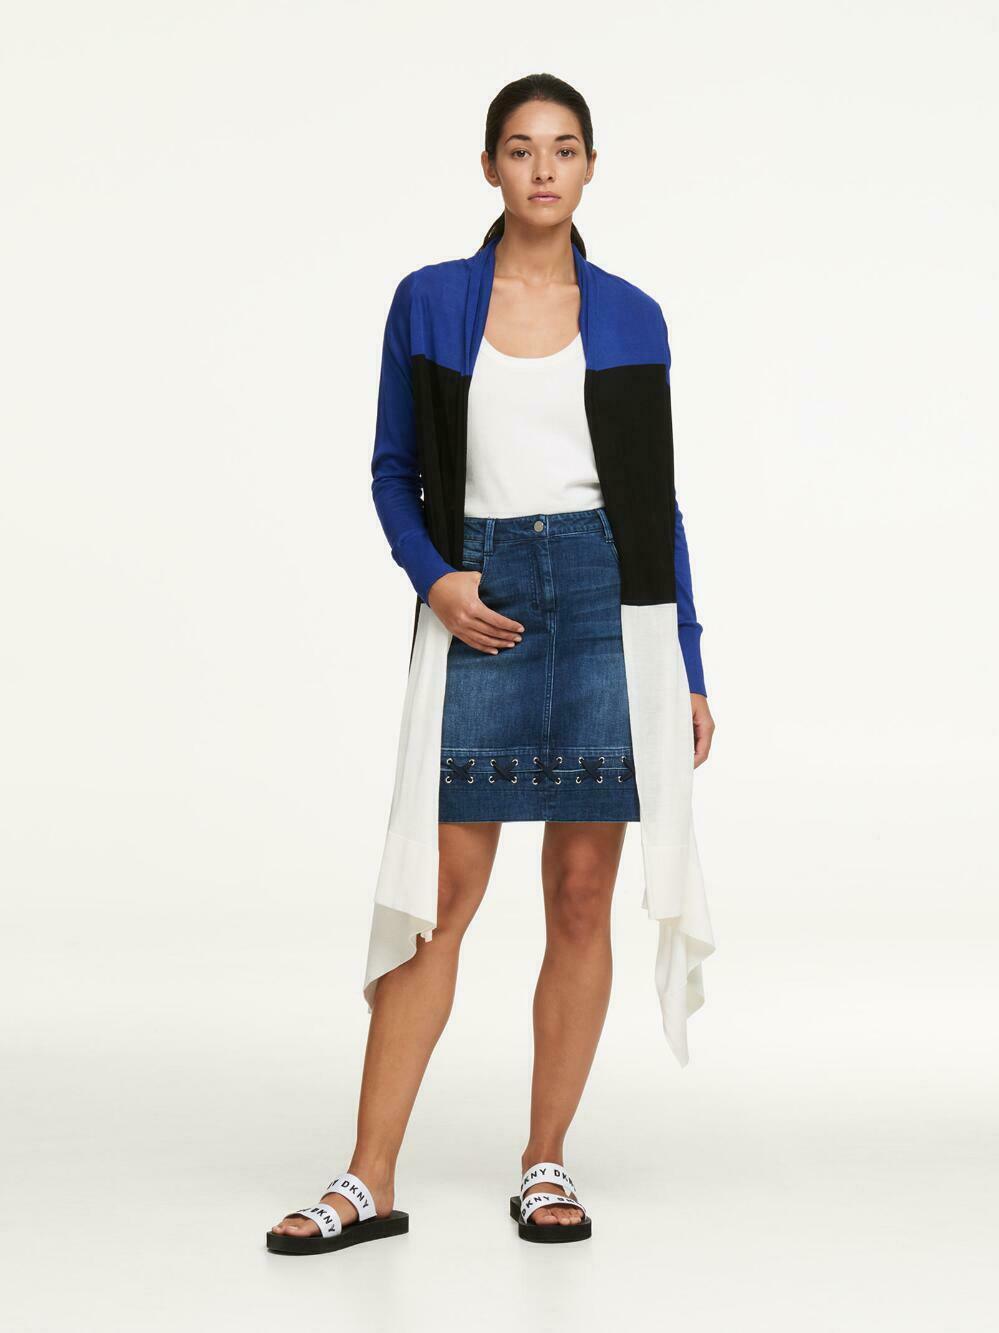 DKNY Women's Colorblocked Draped Open Front Cardigan Sweater Blue Black White XS - SVNYFancy